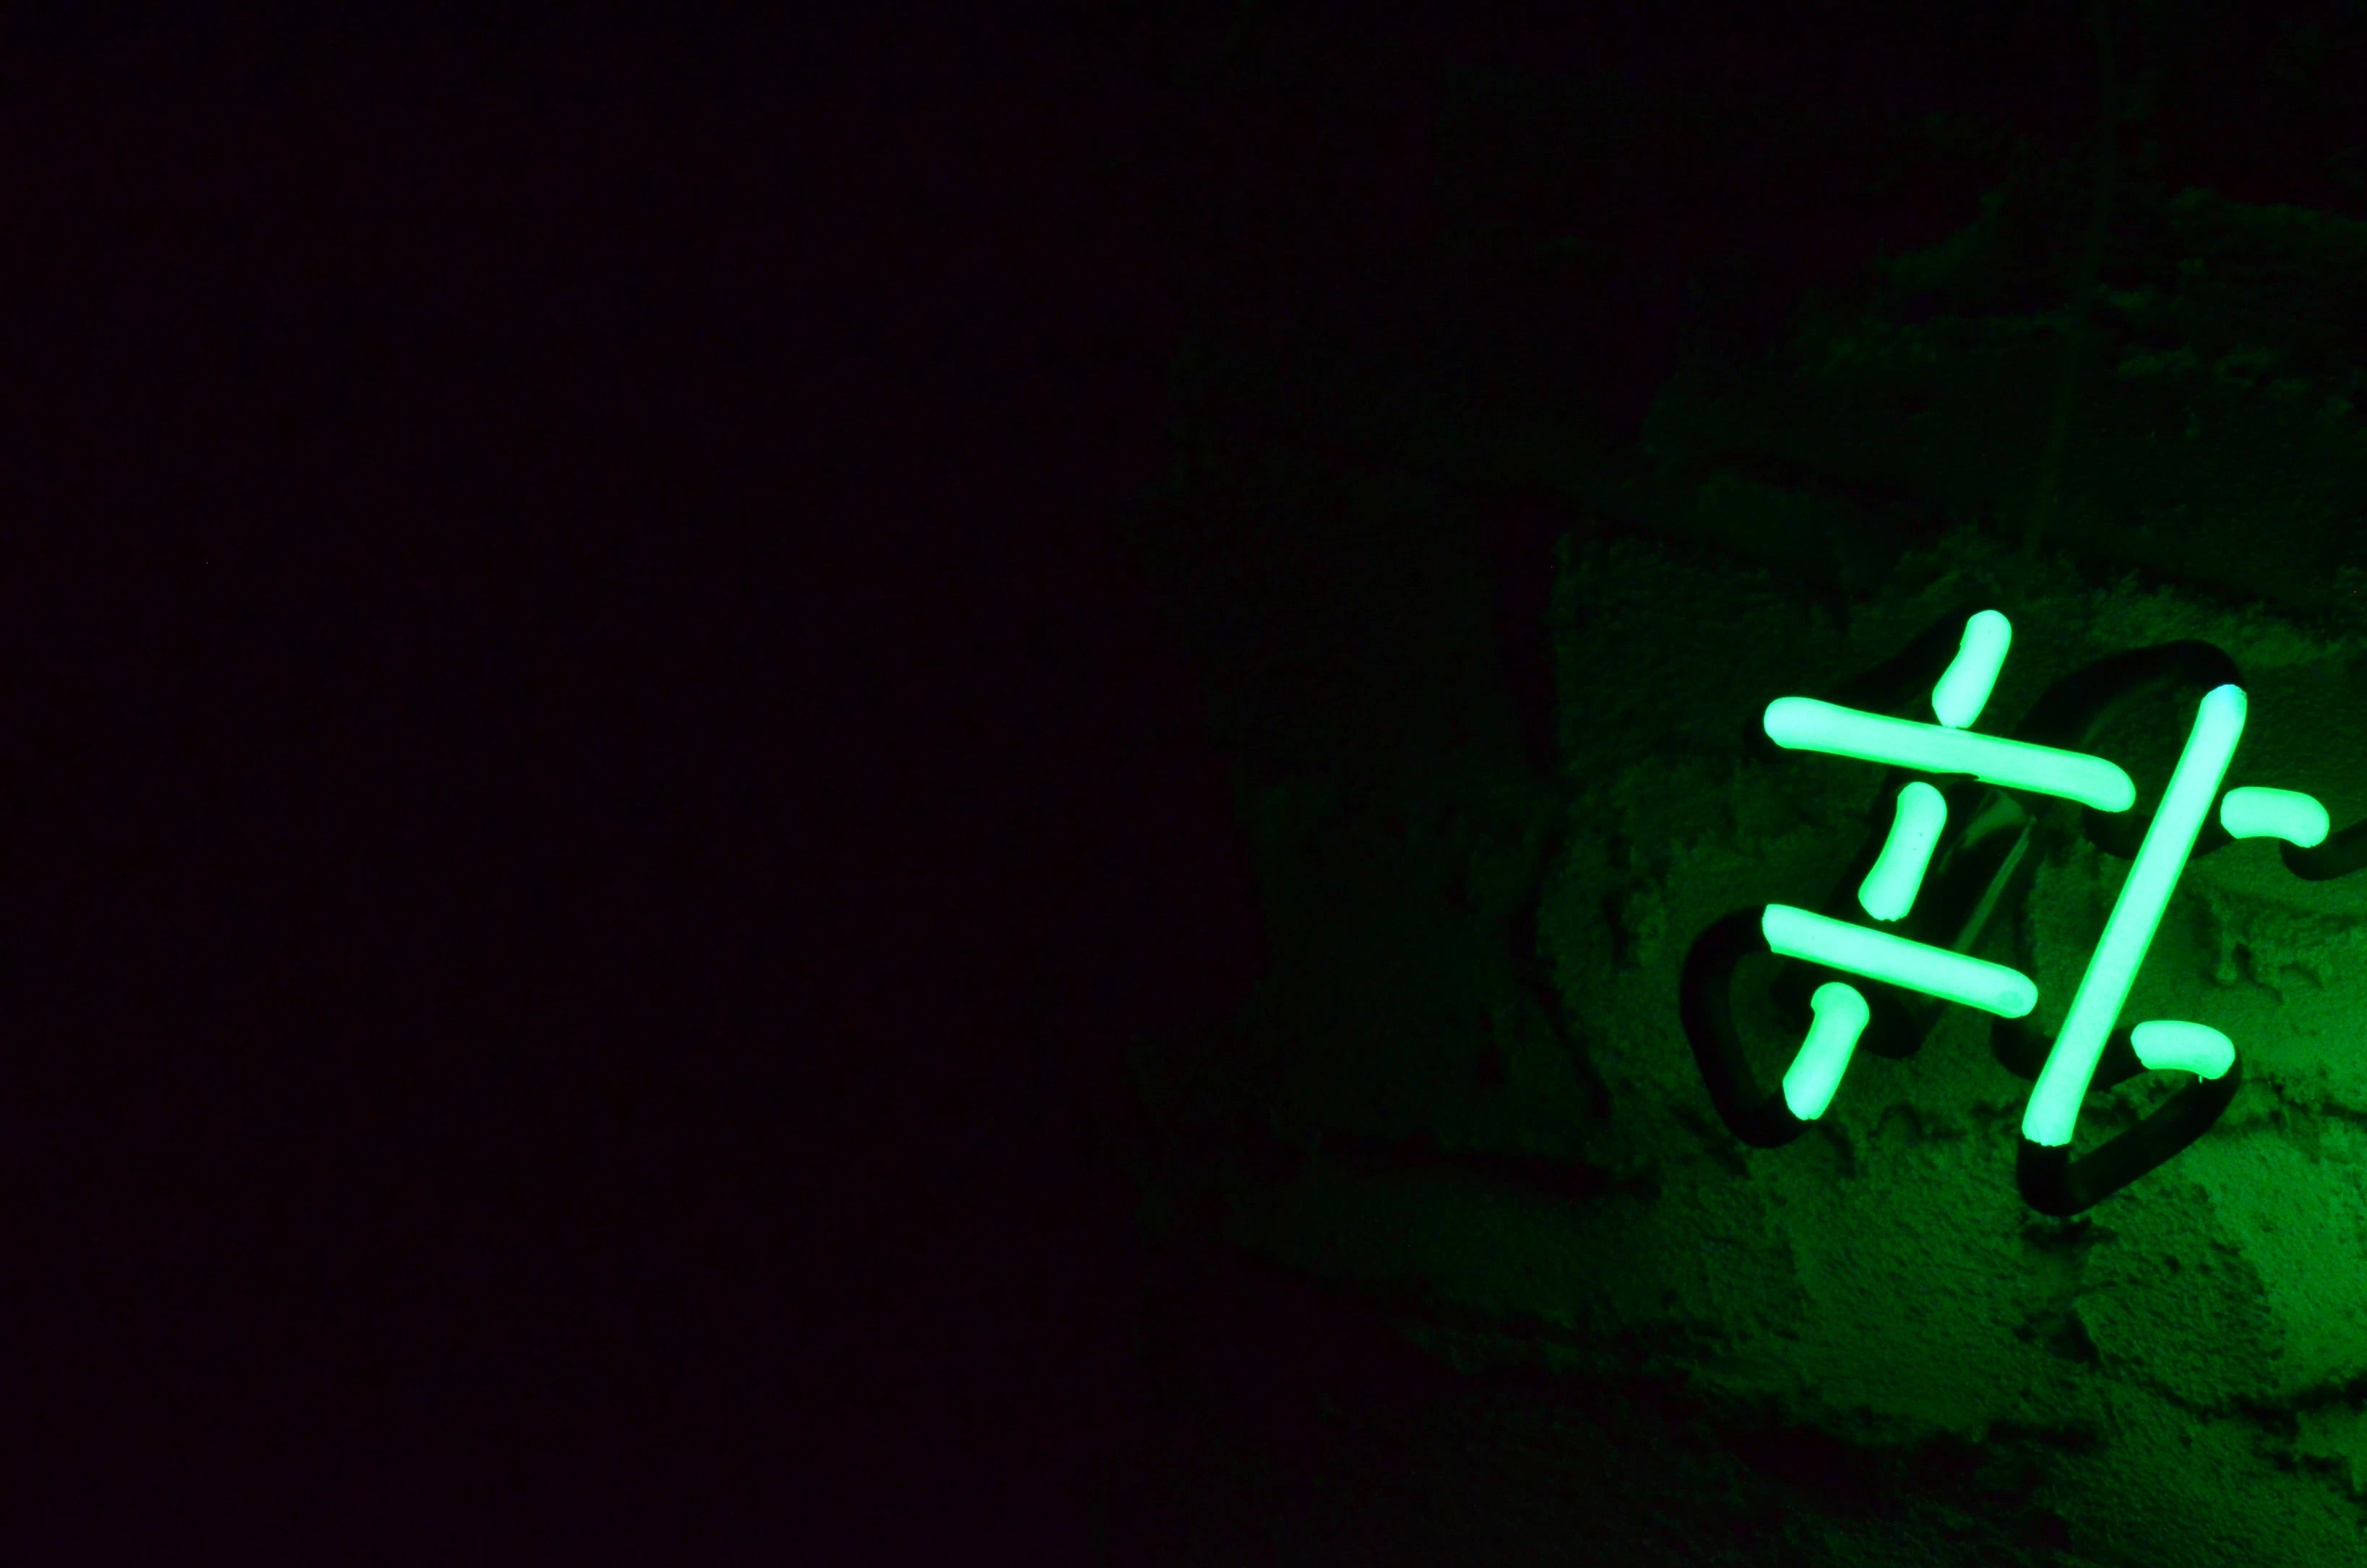 glow in the dark hashtag sign